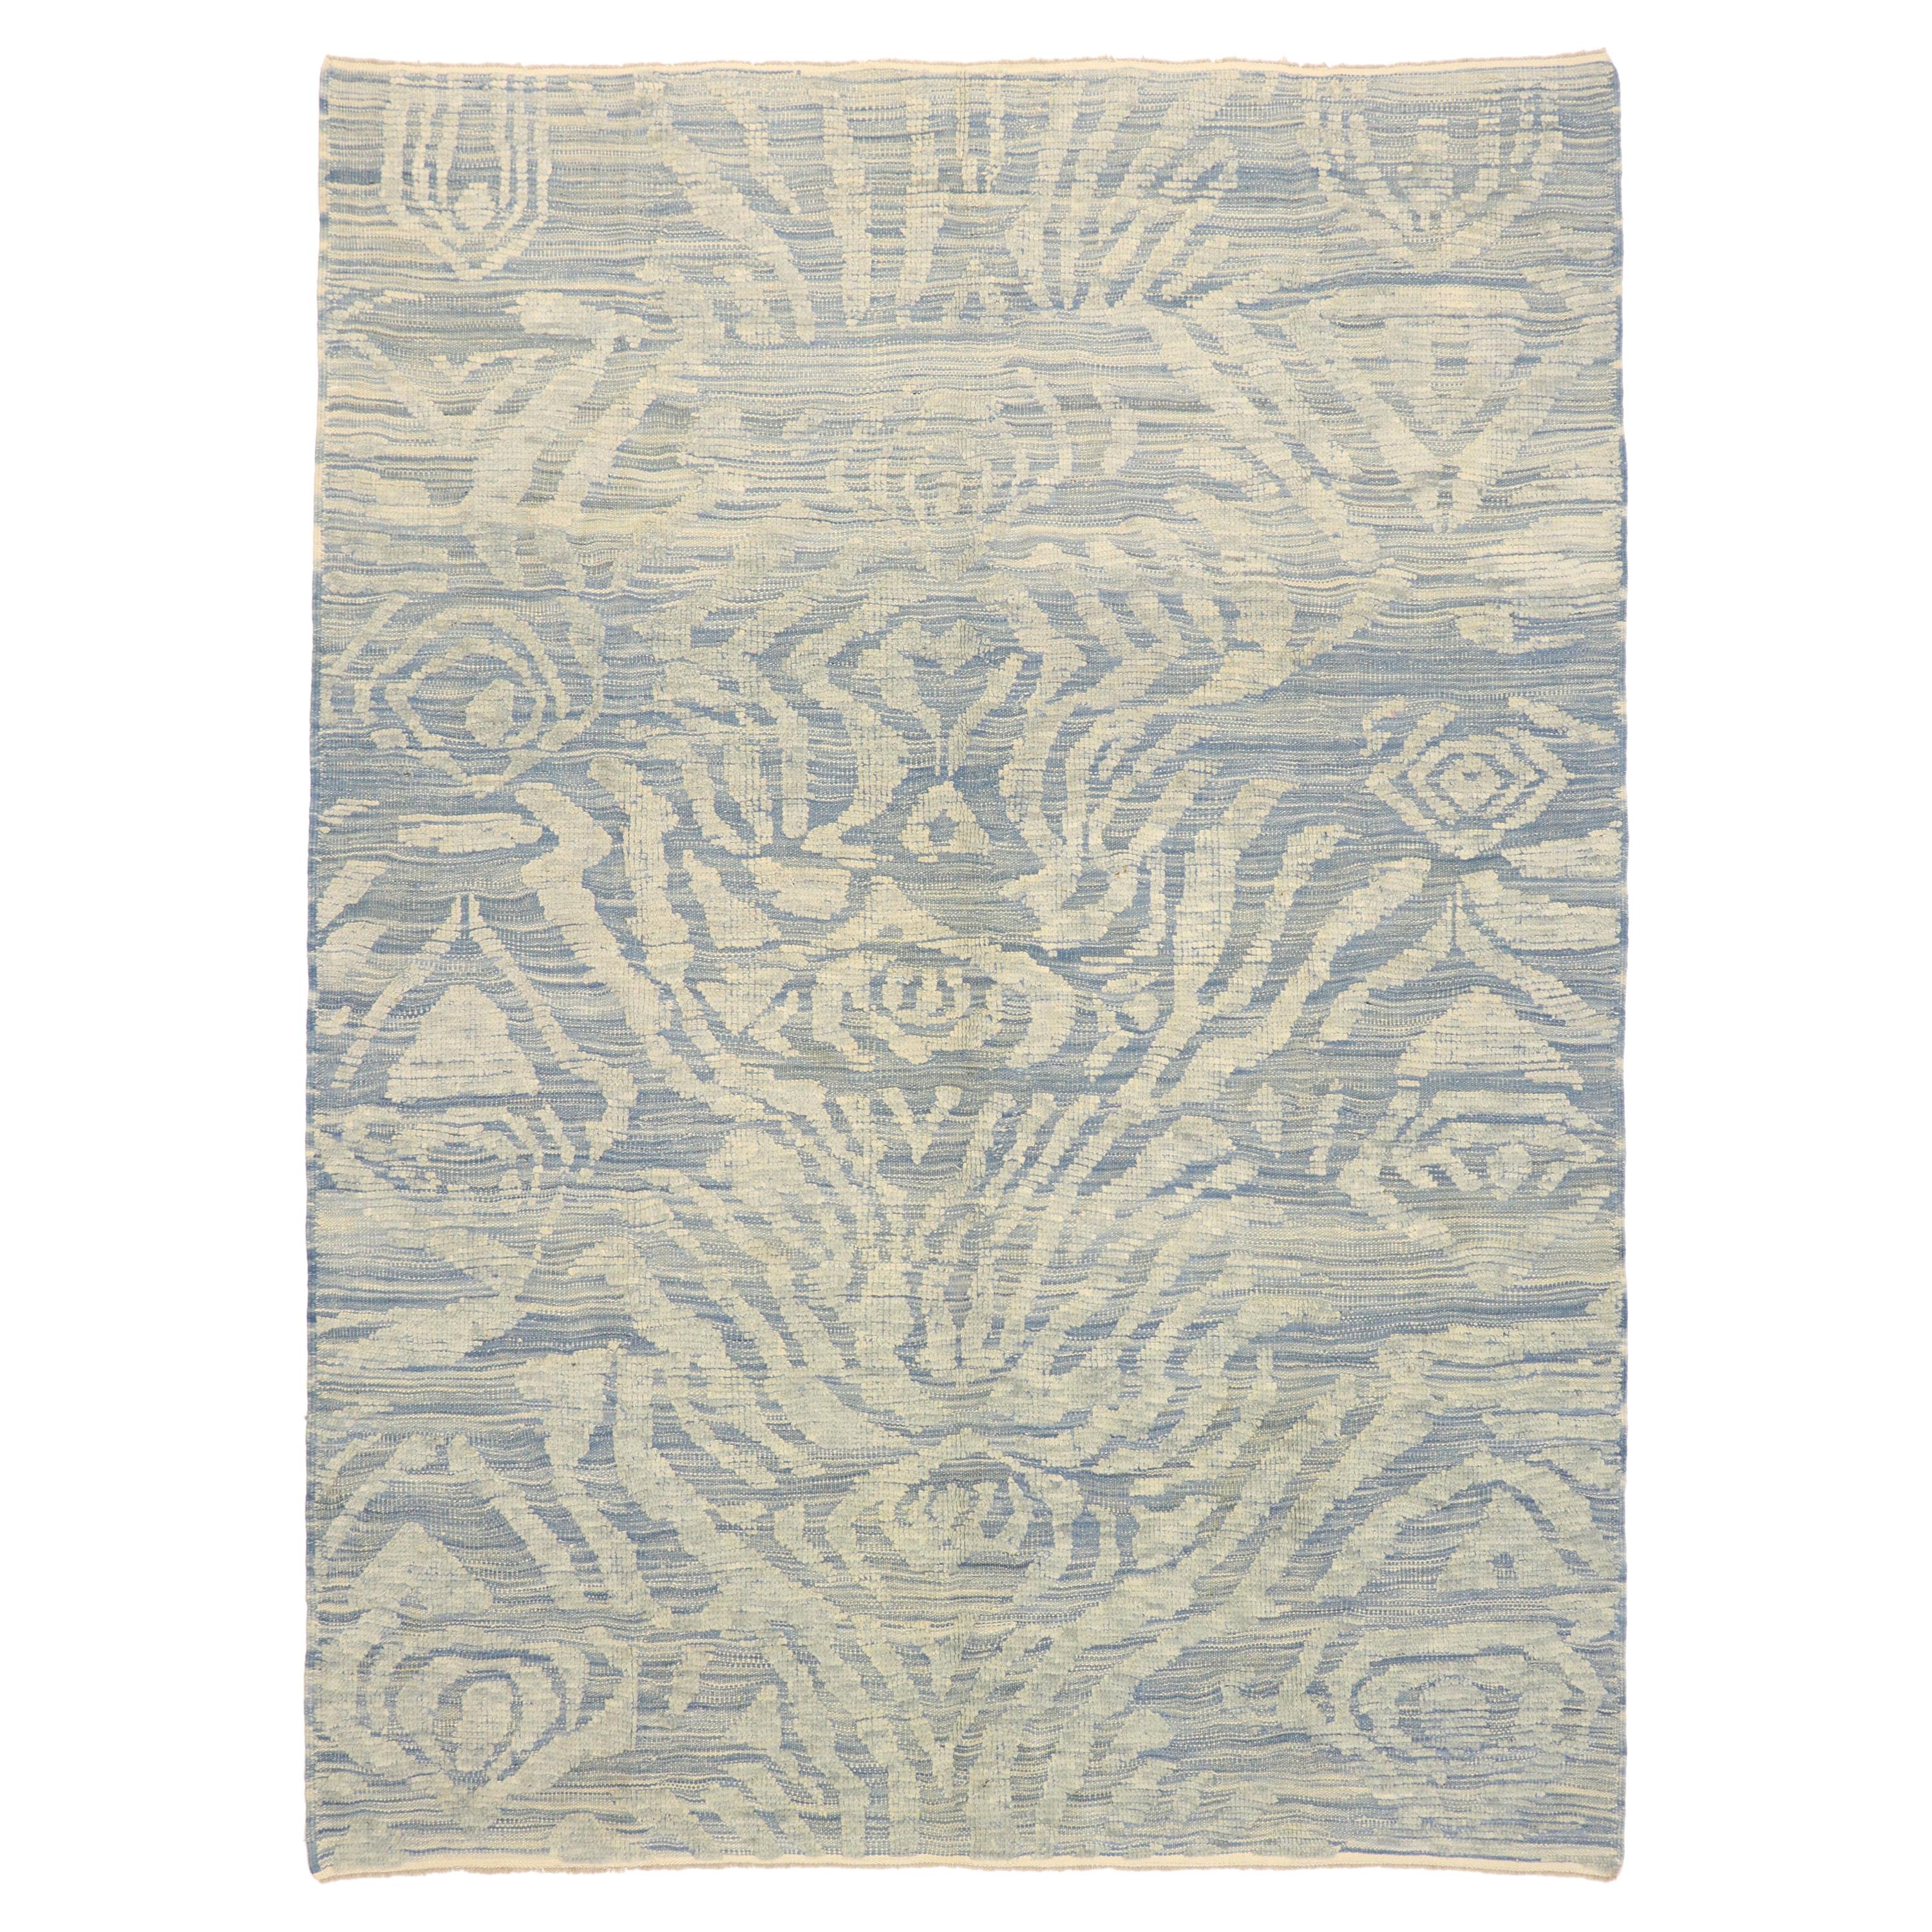 New Contemporary Turkish Area Rug with Raised Design and Modern Style